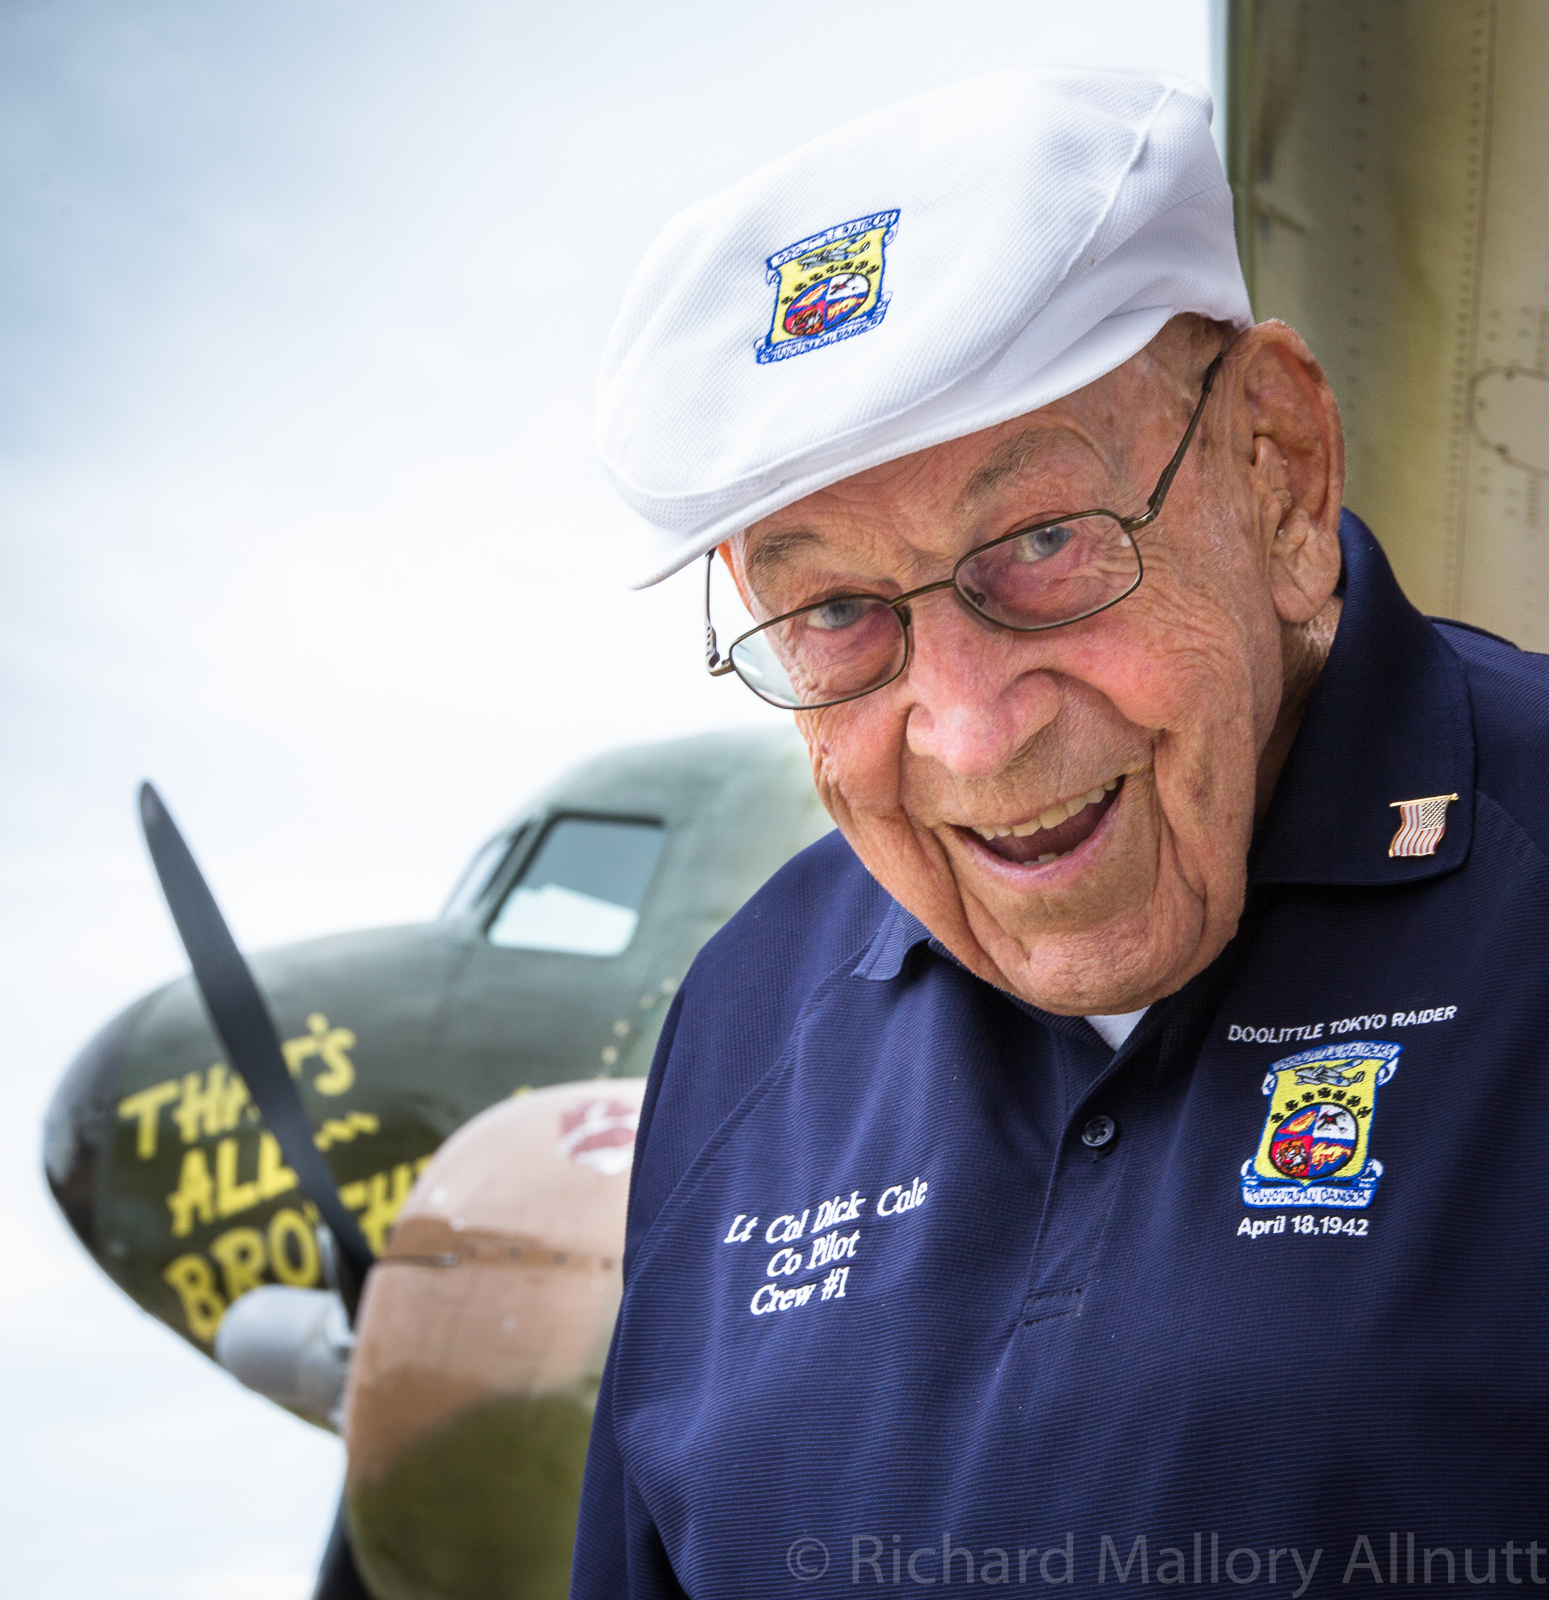 Lt.Col. Dick Cole (seen here at Oshkosh last year) will be present for the Doolittle Raid tribute at Wings Over Houston. Dick Cole is the last surviving crew member from the famous April, 1942 raid on Japan, and is 102 years old! You can meet the famous co-pilot of Jimmy Doolittle's bomber in the Legends and Heroes Tent. (photo by Richard Mallory Allnutt)